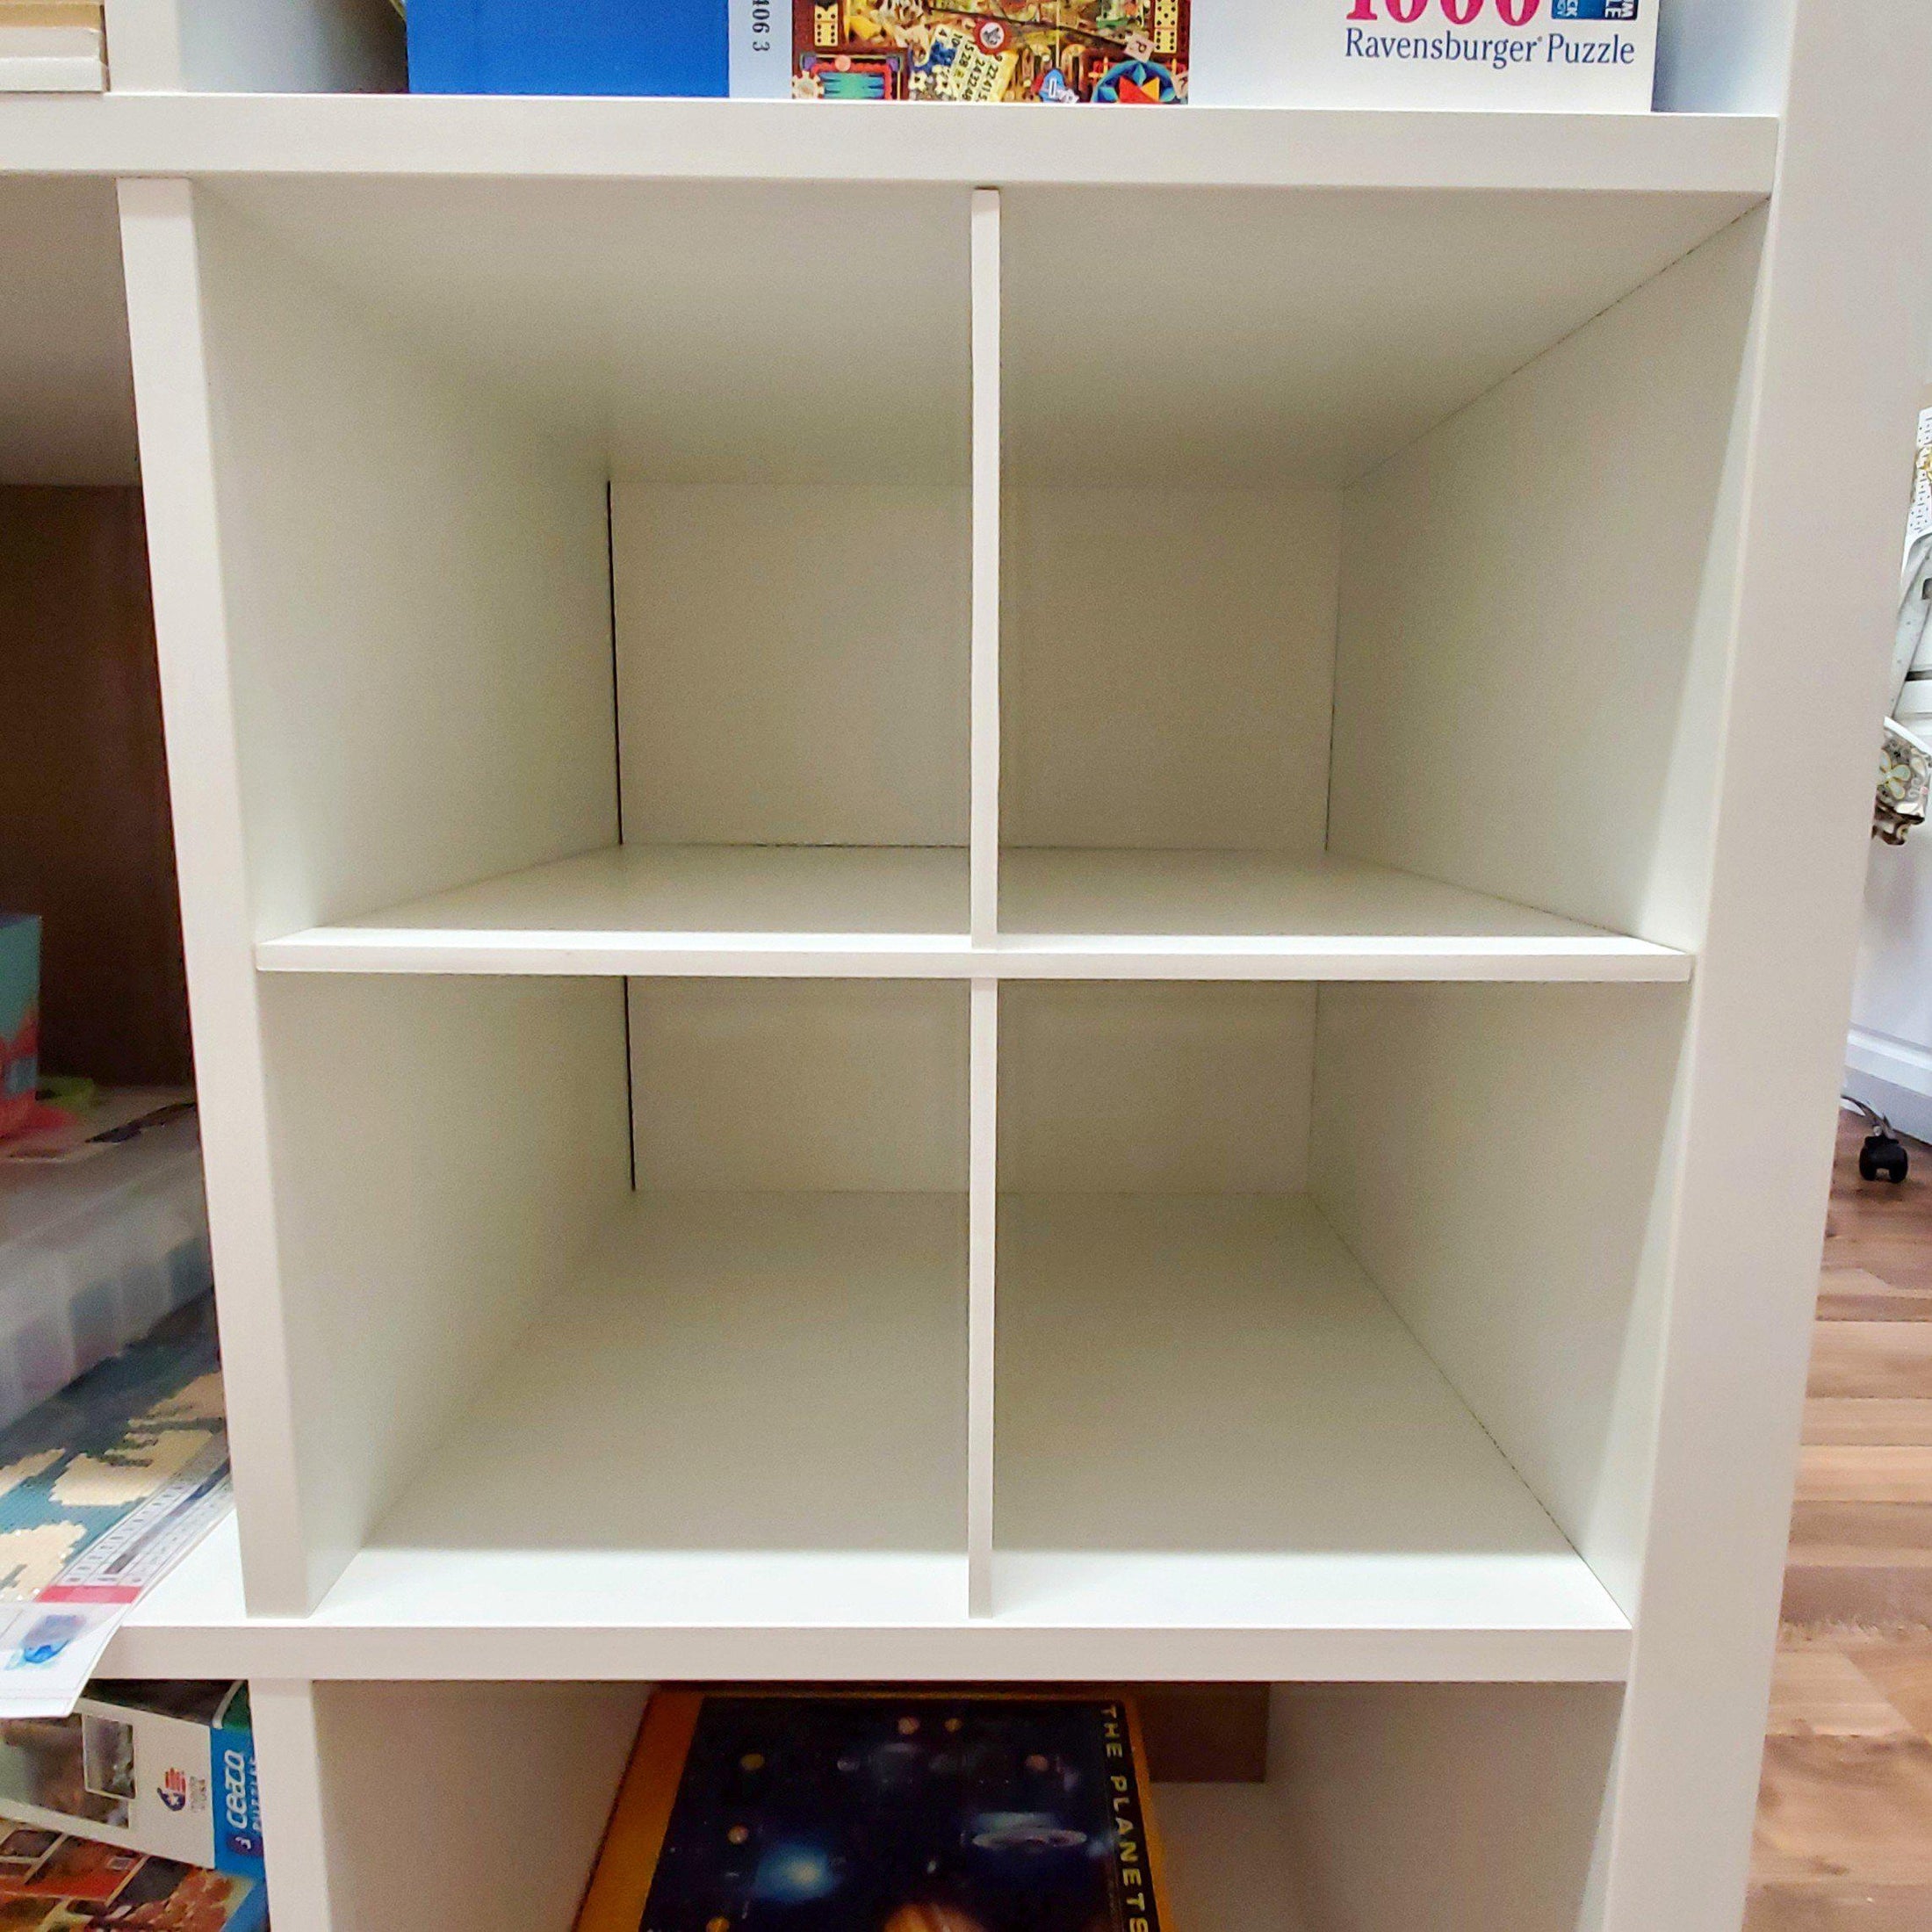 4 Cubby Cube Insert for Cube Storage Shelves, Unfinished or White-The Steady Hand